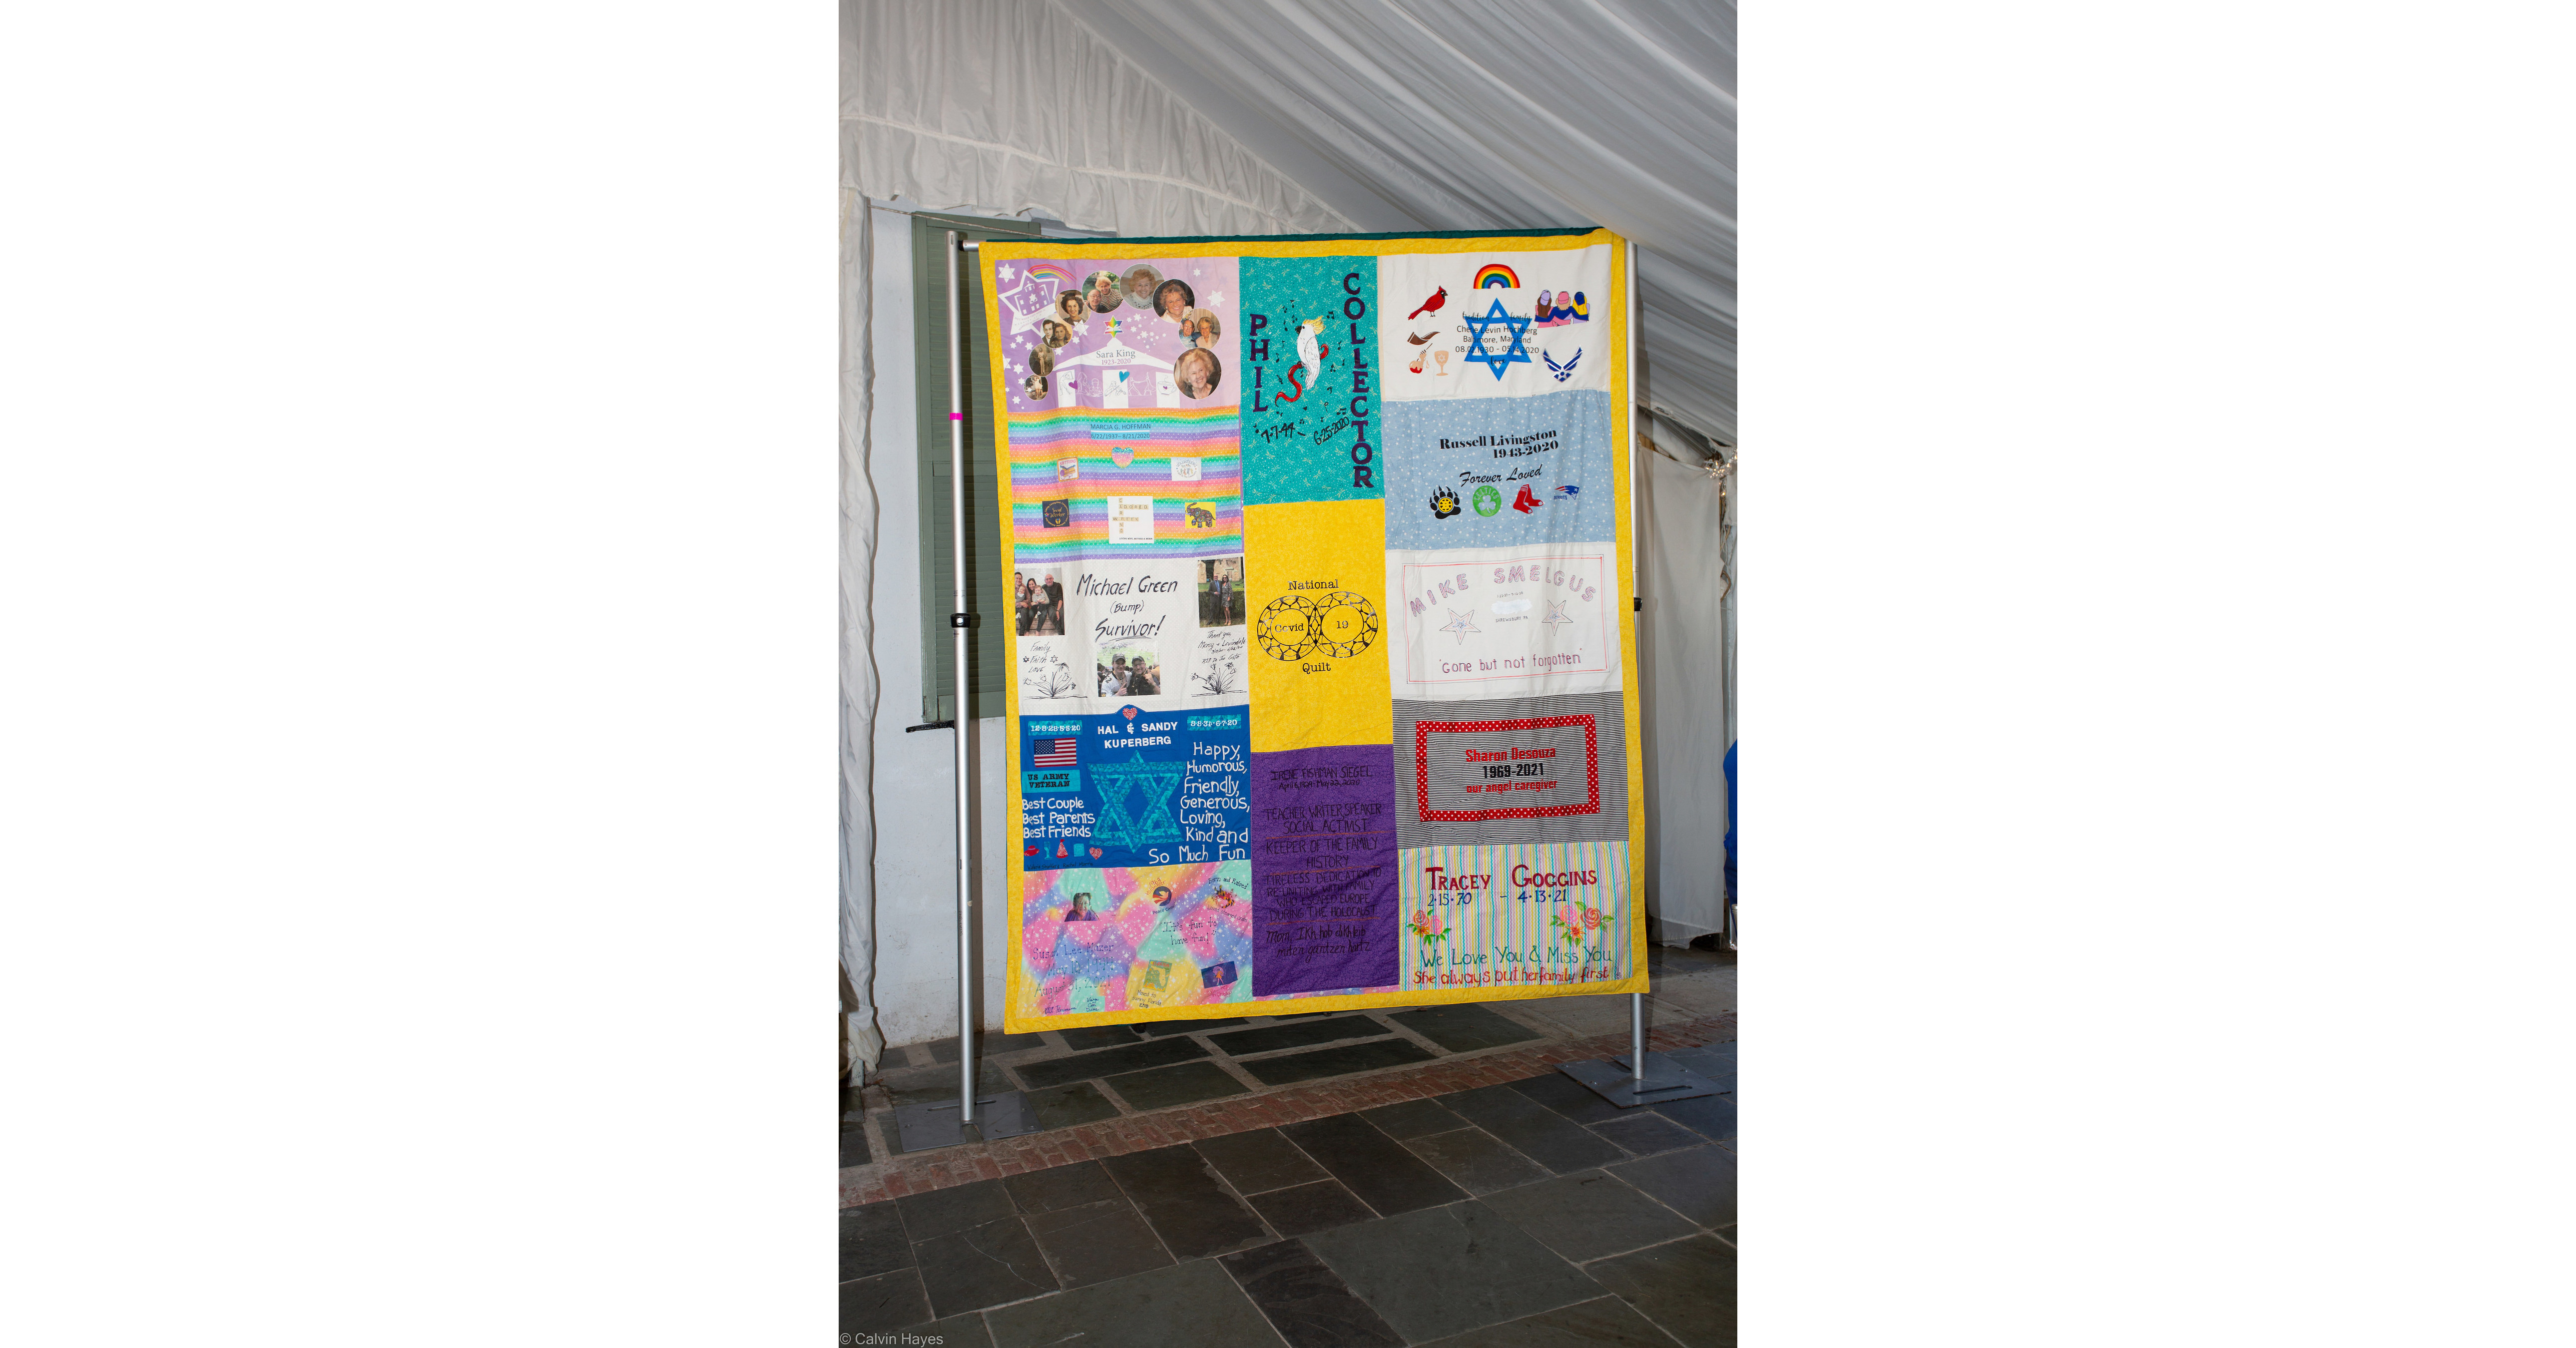 "NATIONAL COVID-19 QUILT" INITIATIVE LAUNCHES TO HONOR THOSE AFFECTED BY THE COVID-19 PANDEMIC